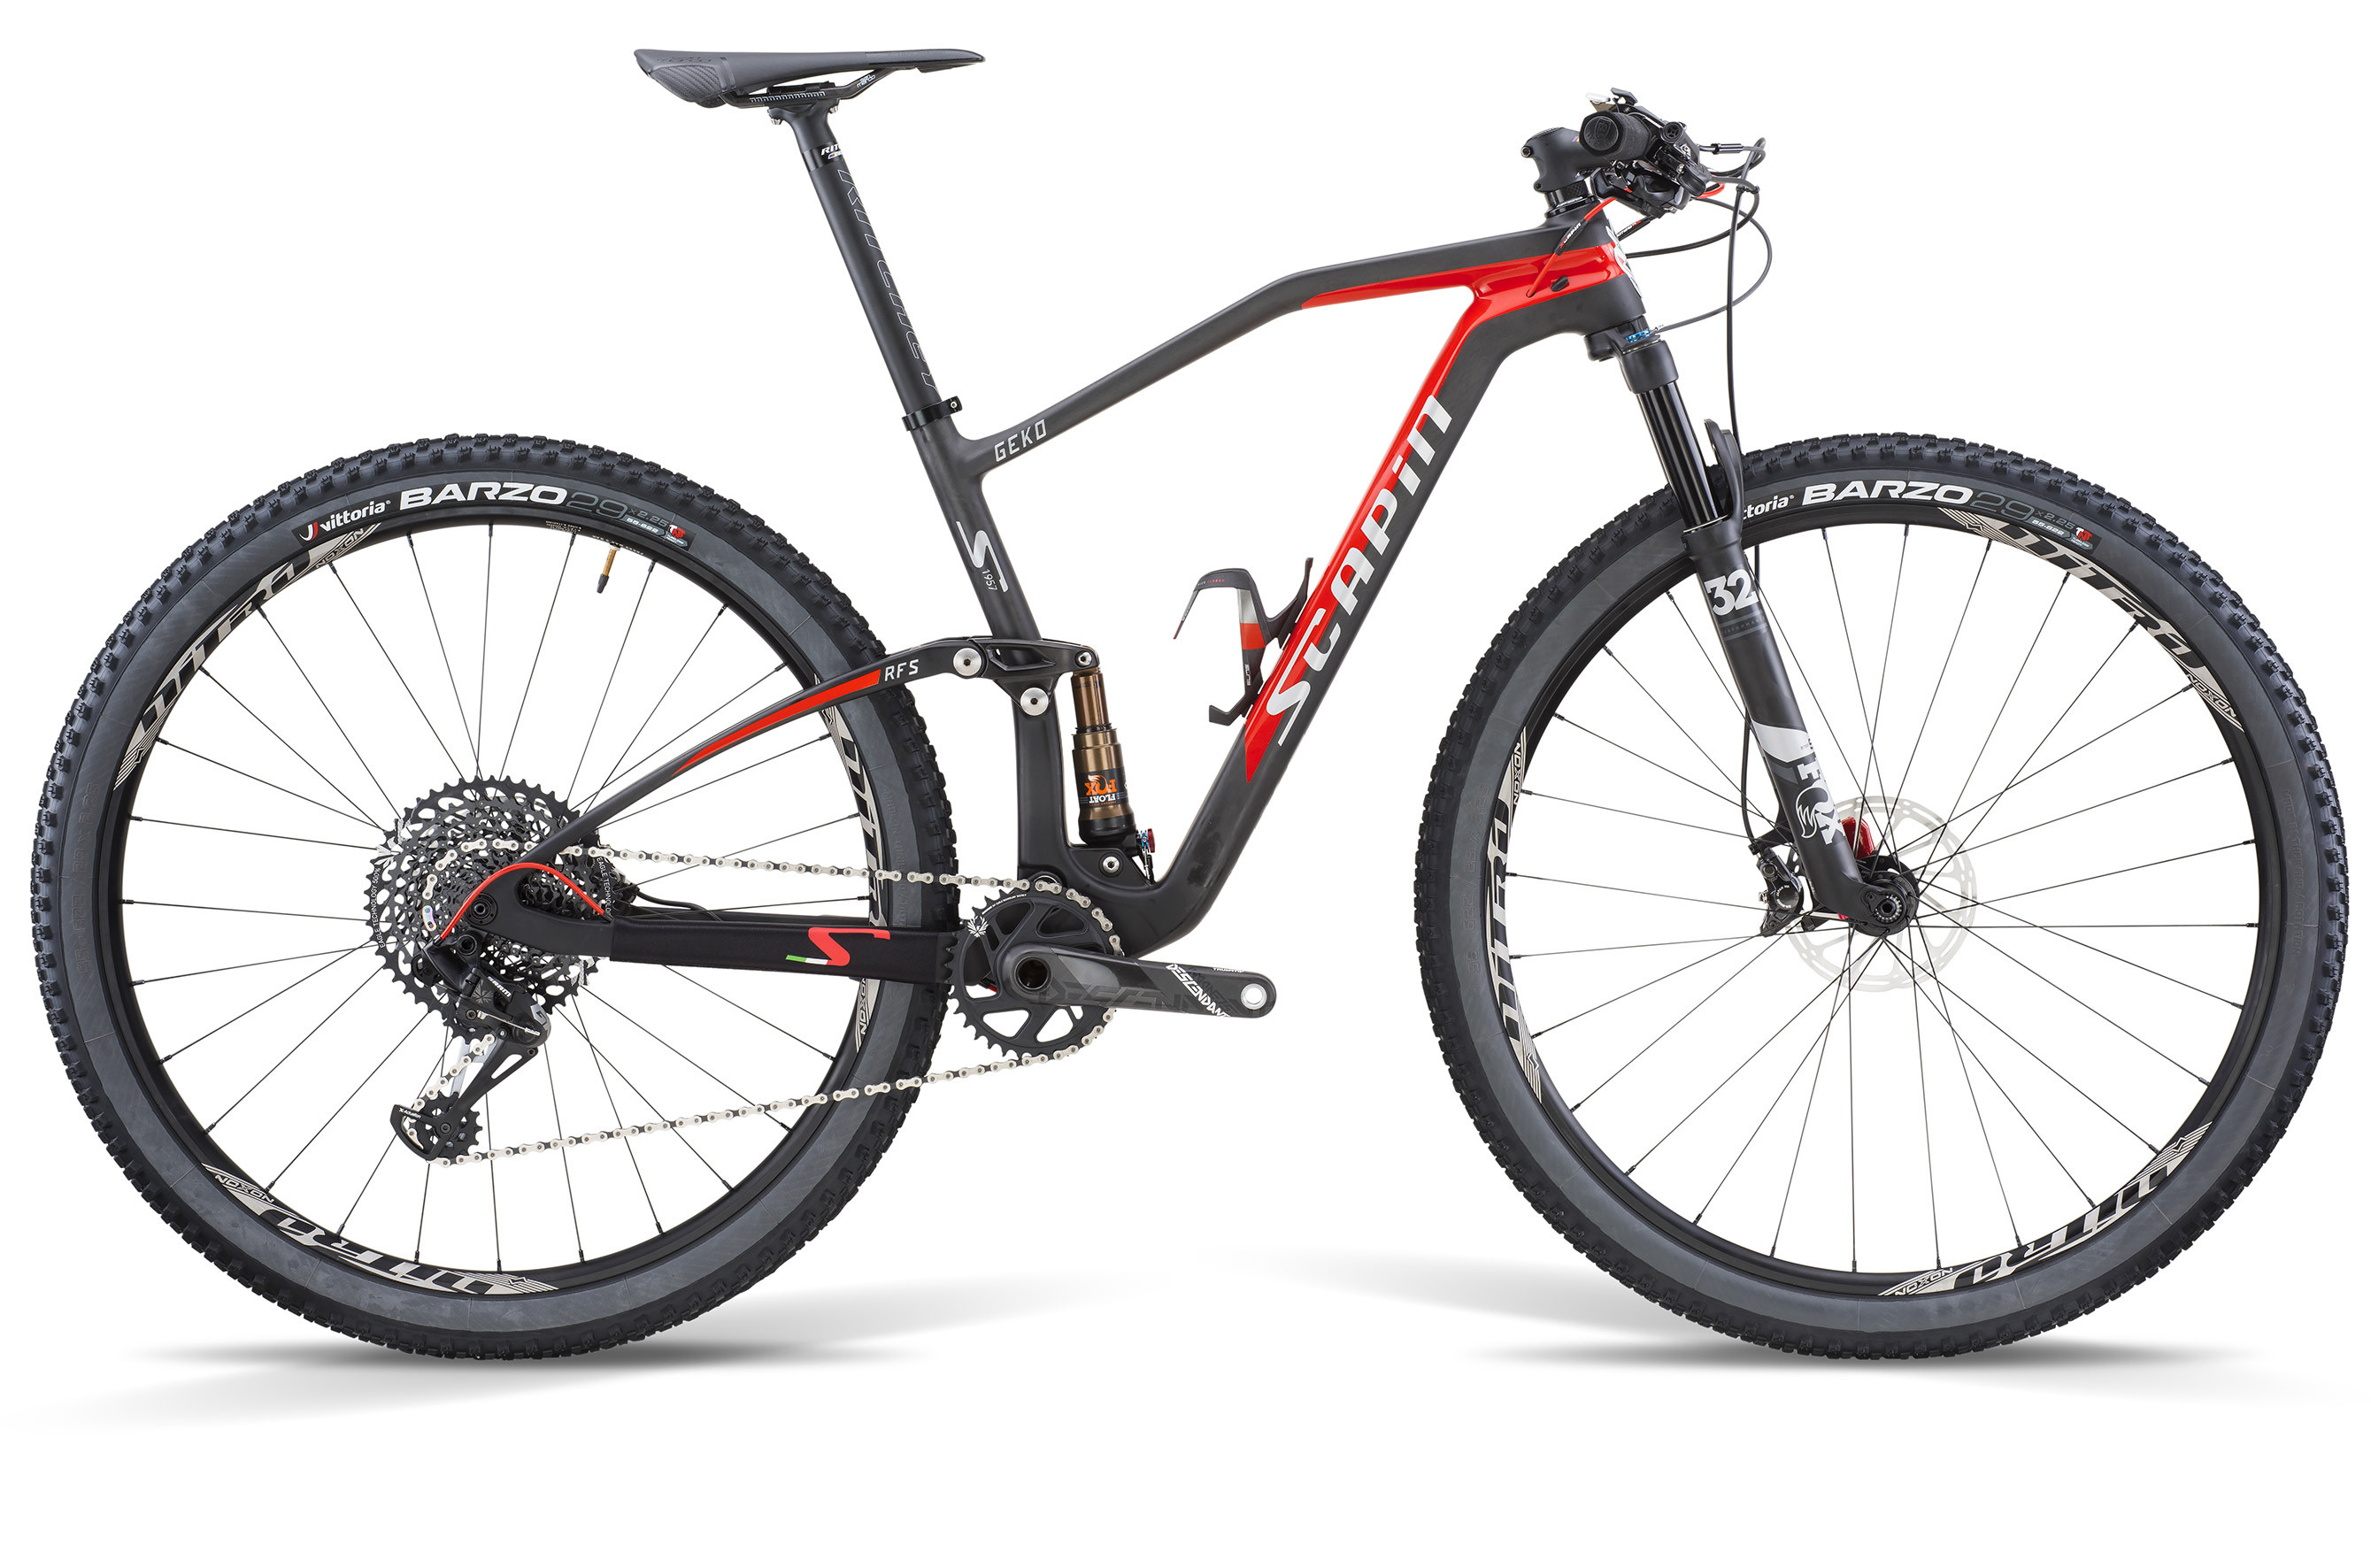 SCAPIN VTT COMPLET GEKO 29" CARBON - SRAM X01 12sp - SID - Taille M Black/Red